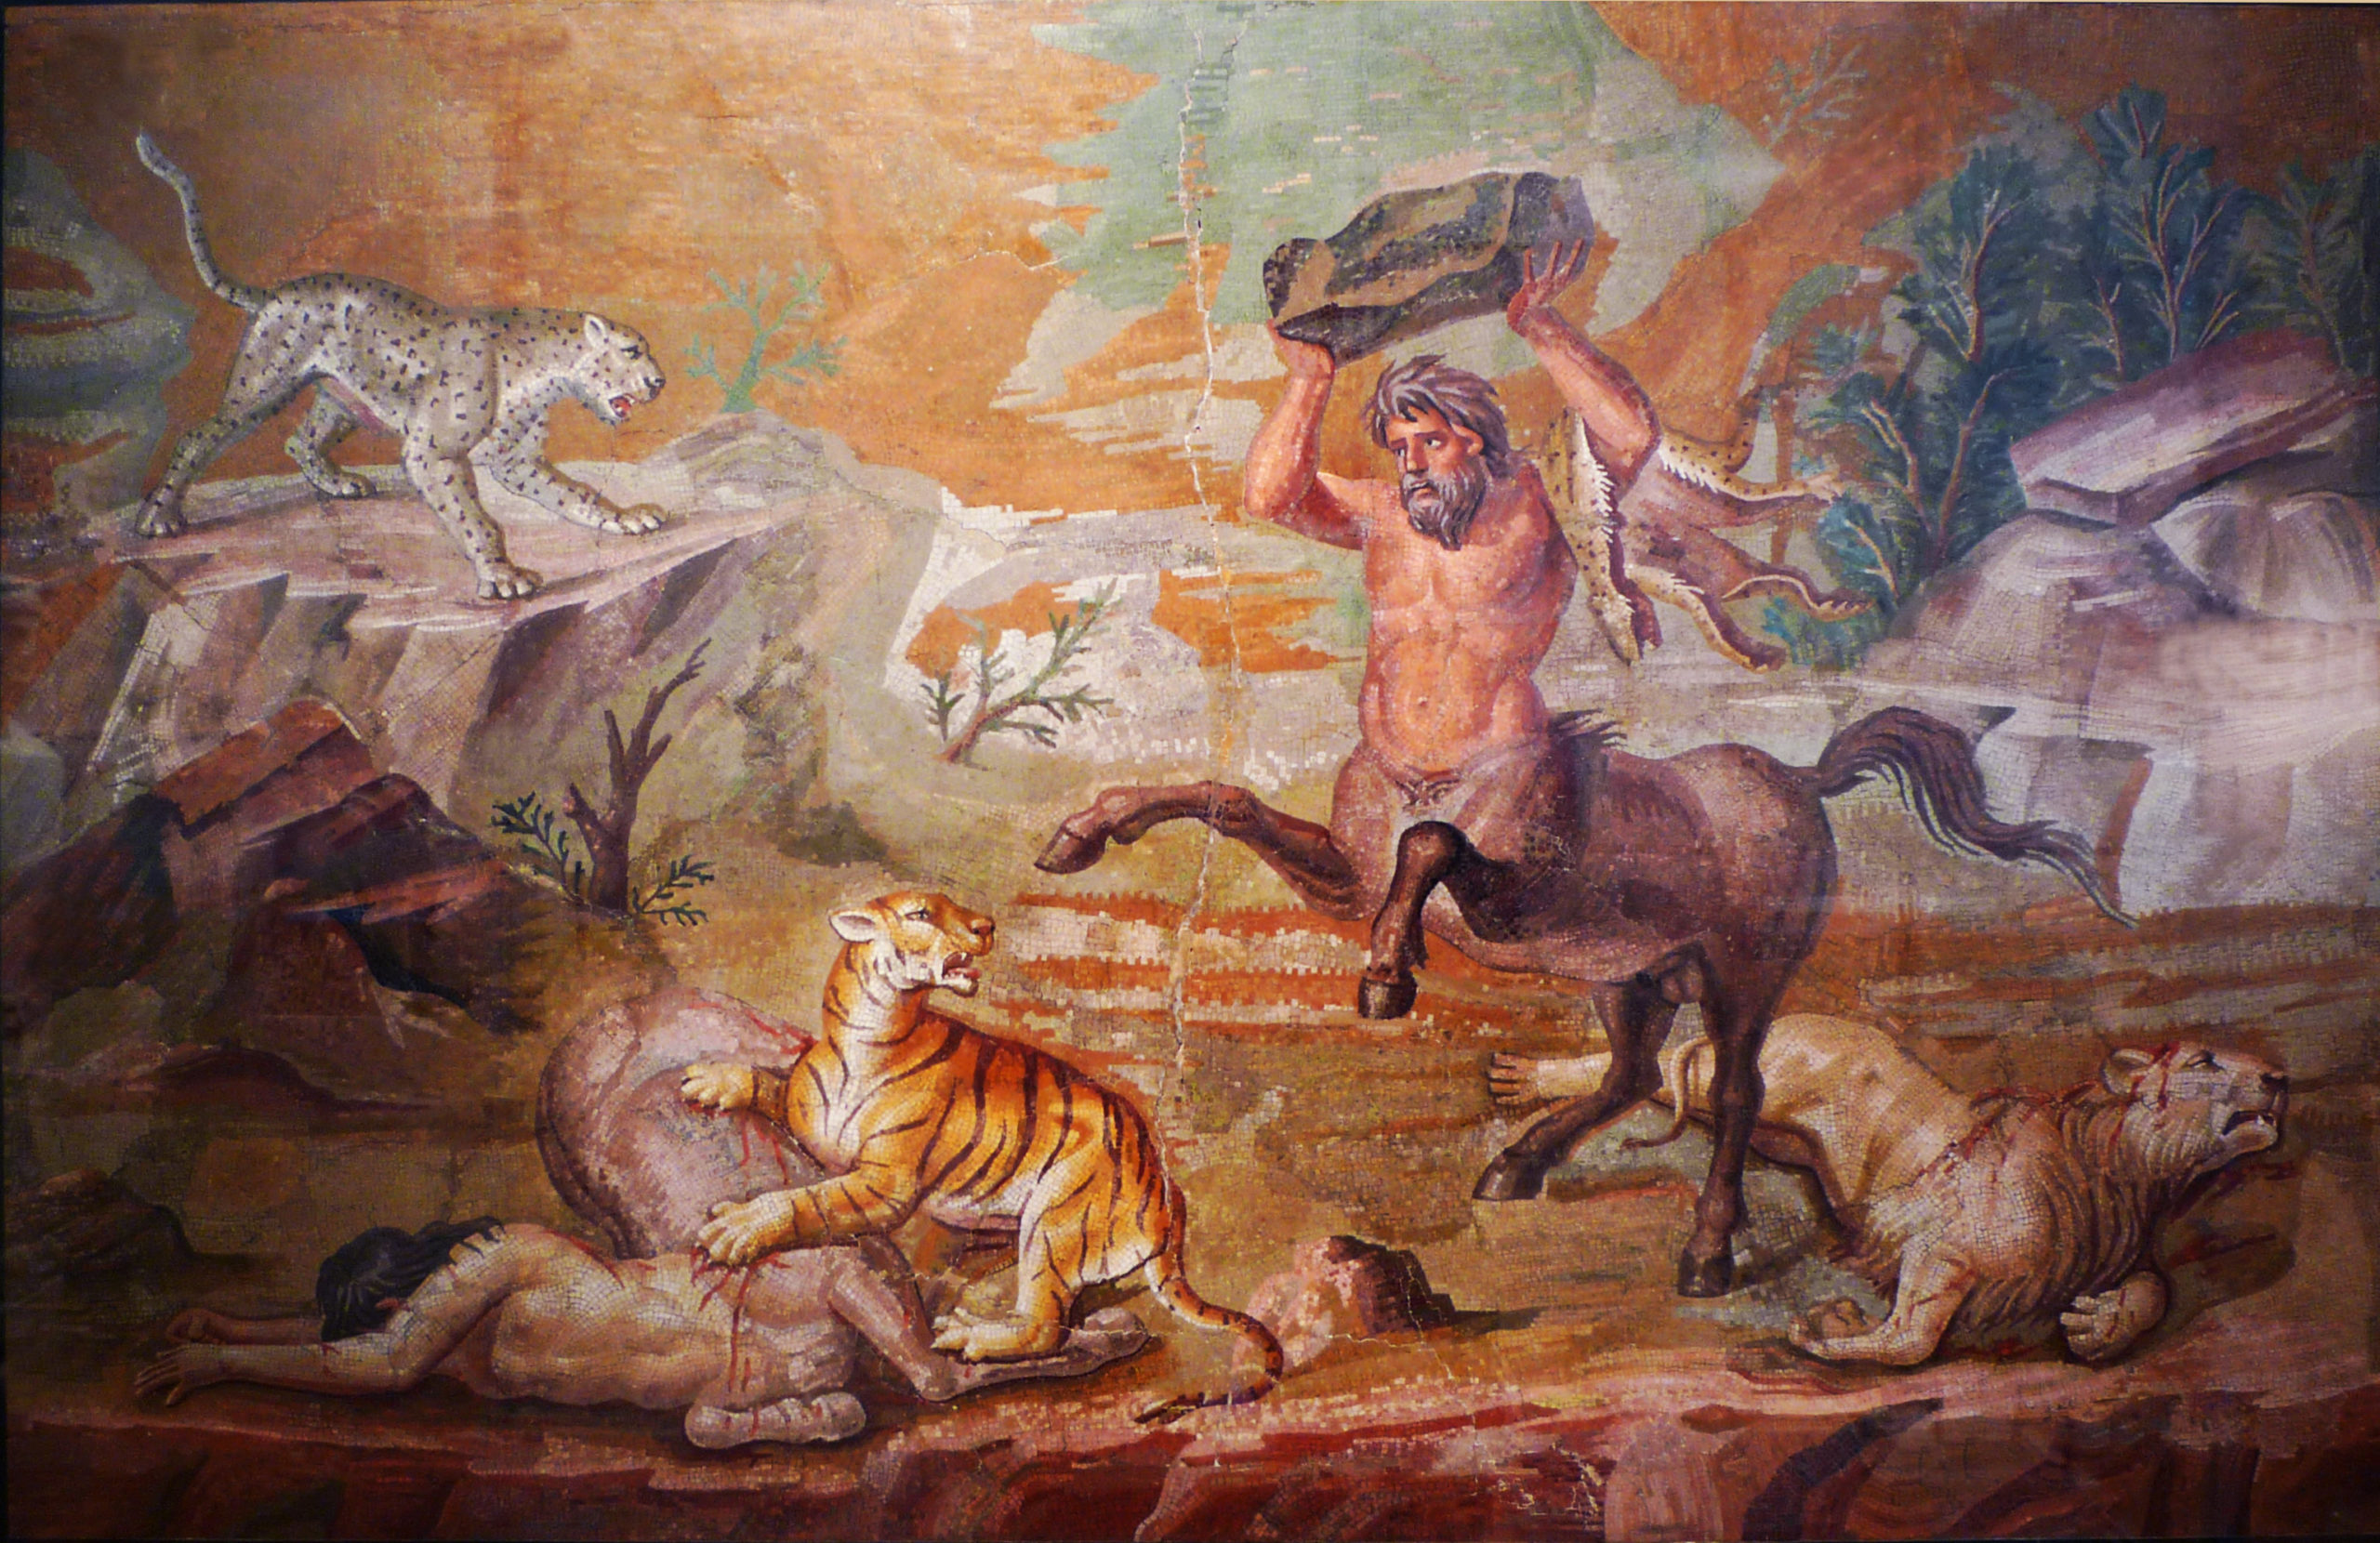 Pair of Centaurs Fighting Cats of Prey from Hadrian's Villa, mosaic, c. 130 C.E. (Altes Museum, Berlin, photo: Steven Zucker, CC BY-NC-SA 2.0)